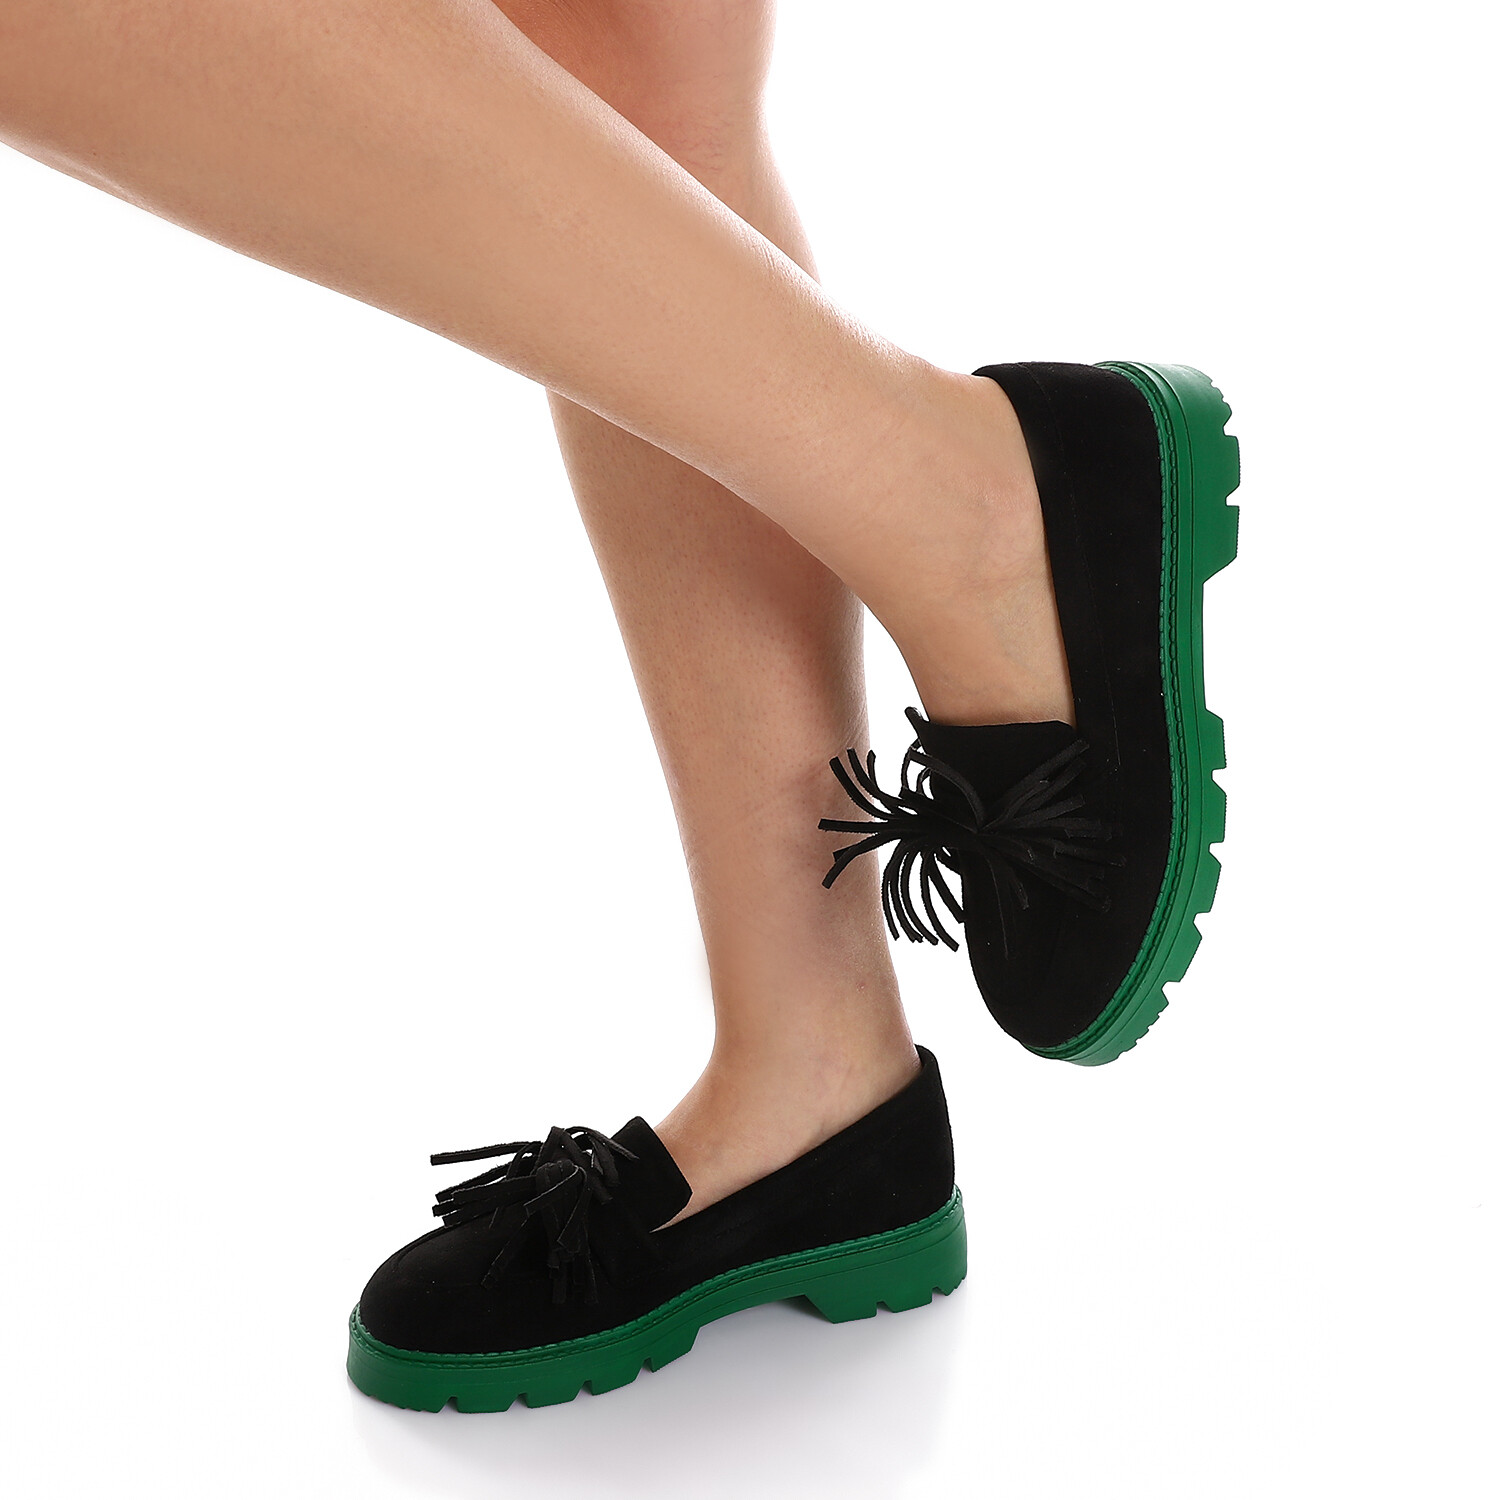 Suede Platform Slip On Shoes With Contrast Sole and Decorative Tassel - Black and Green 3952